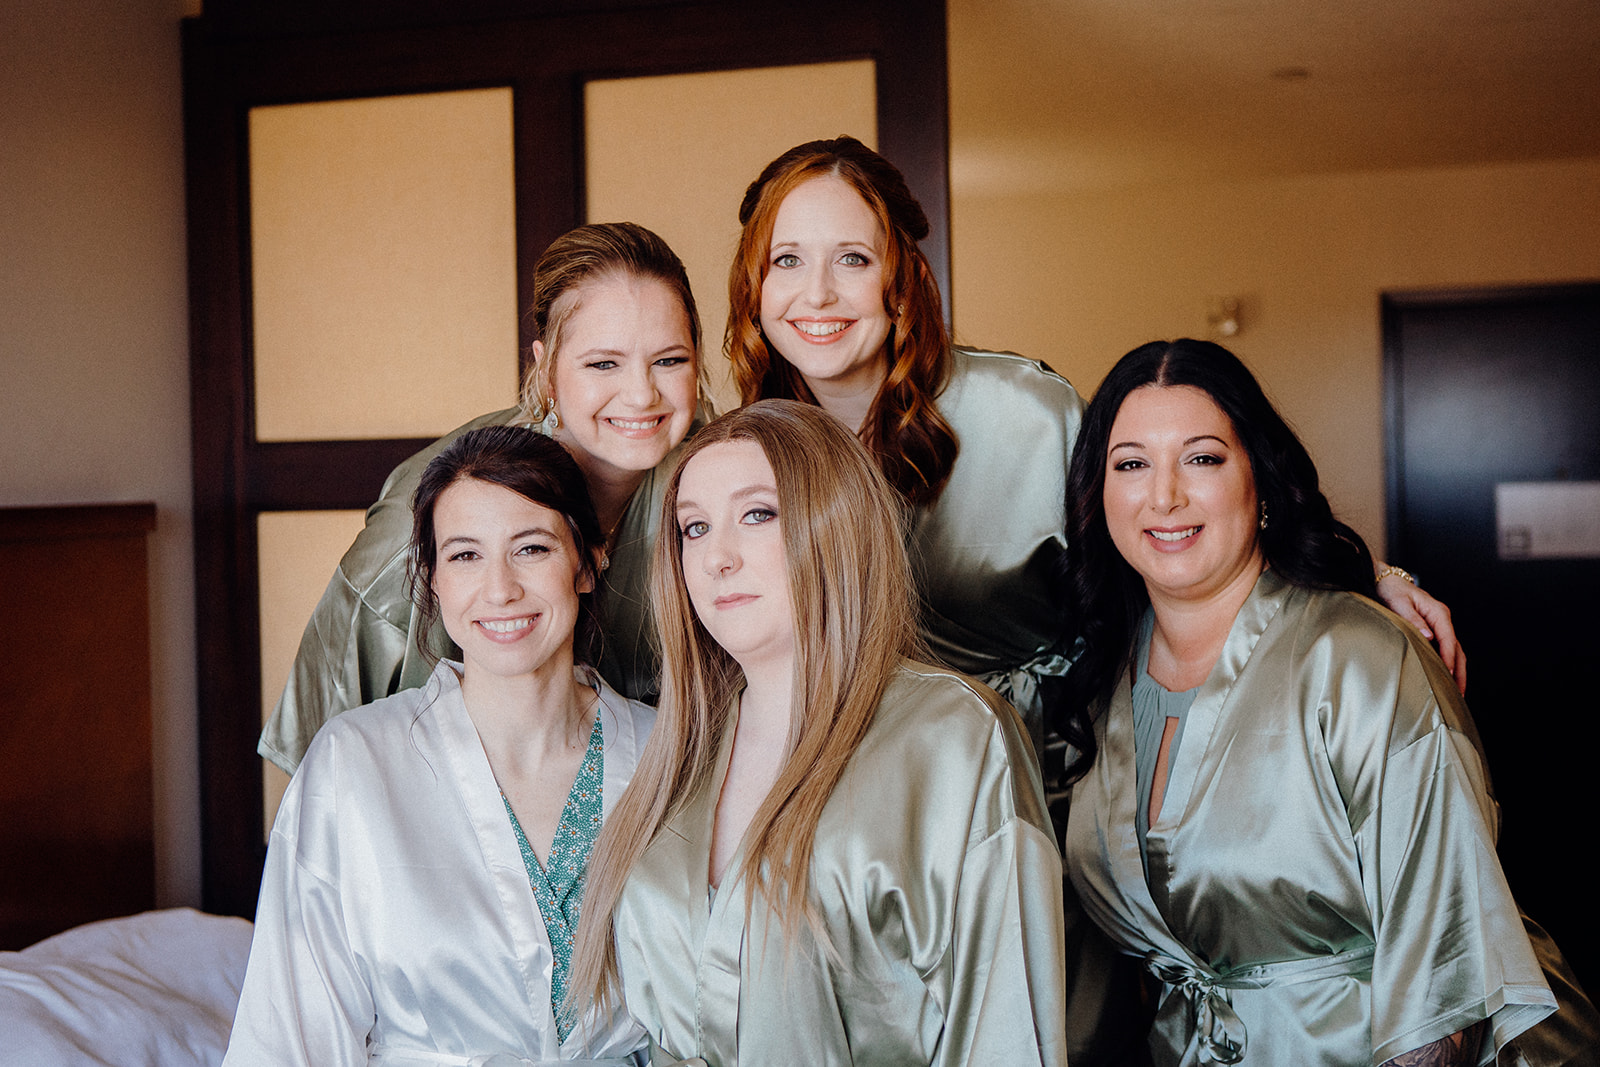 Bridesmaids getting ready
new haven wedding photographer